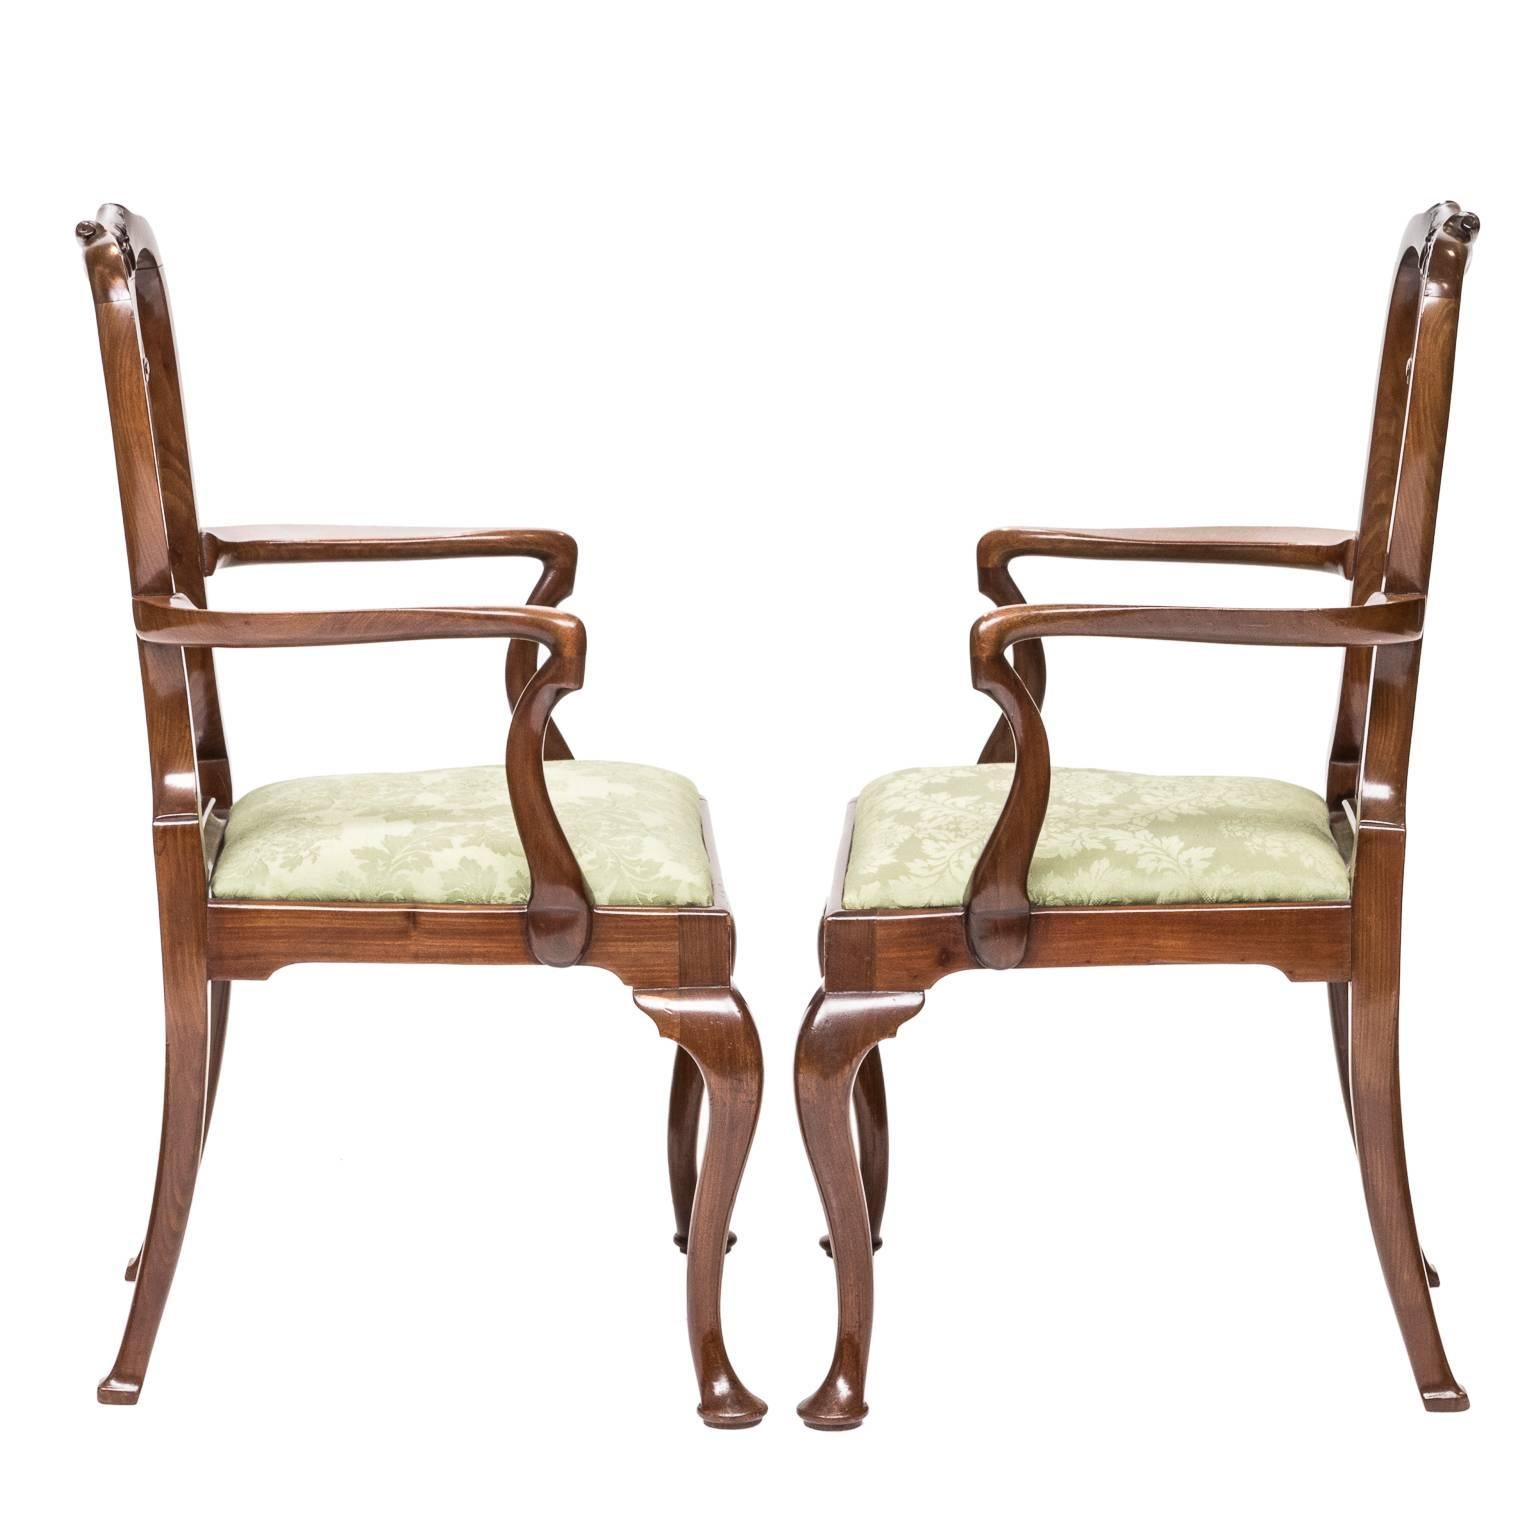 Pair of 19th century Queen Anne walnut child's armchairs. Small in scale and collectible. Shepard's crook arms, urn-shaped splat, a swag of tassels carved on the crest of the chair, cabriole legs and resting on pad feet.